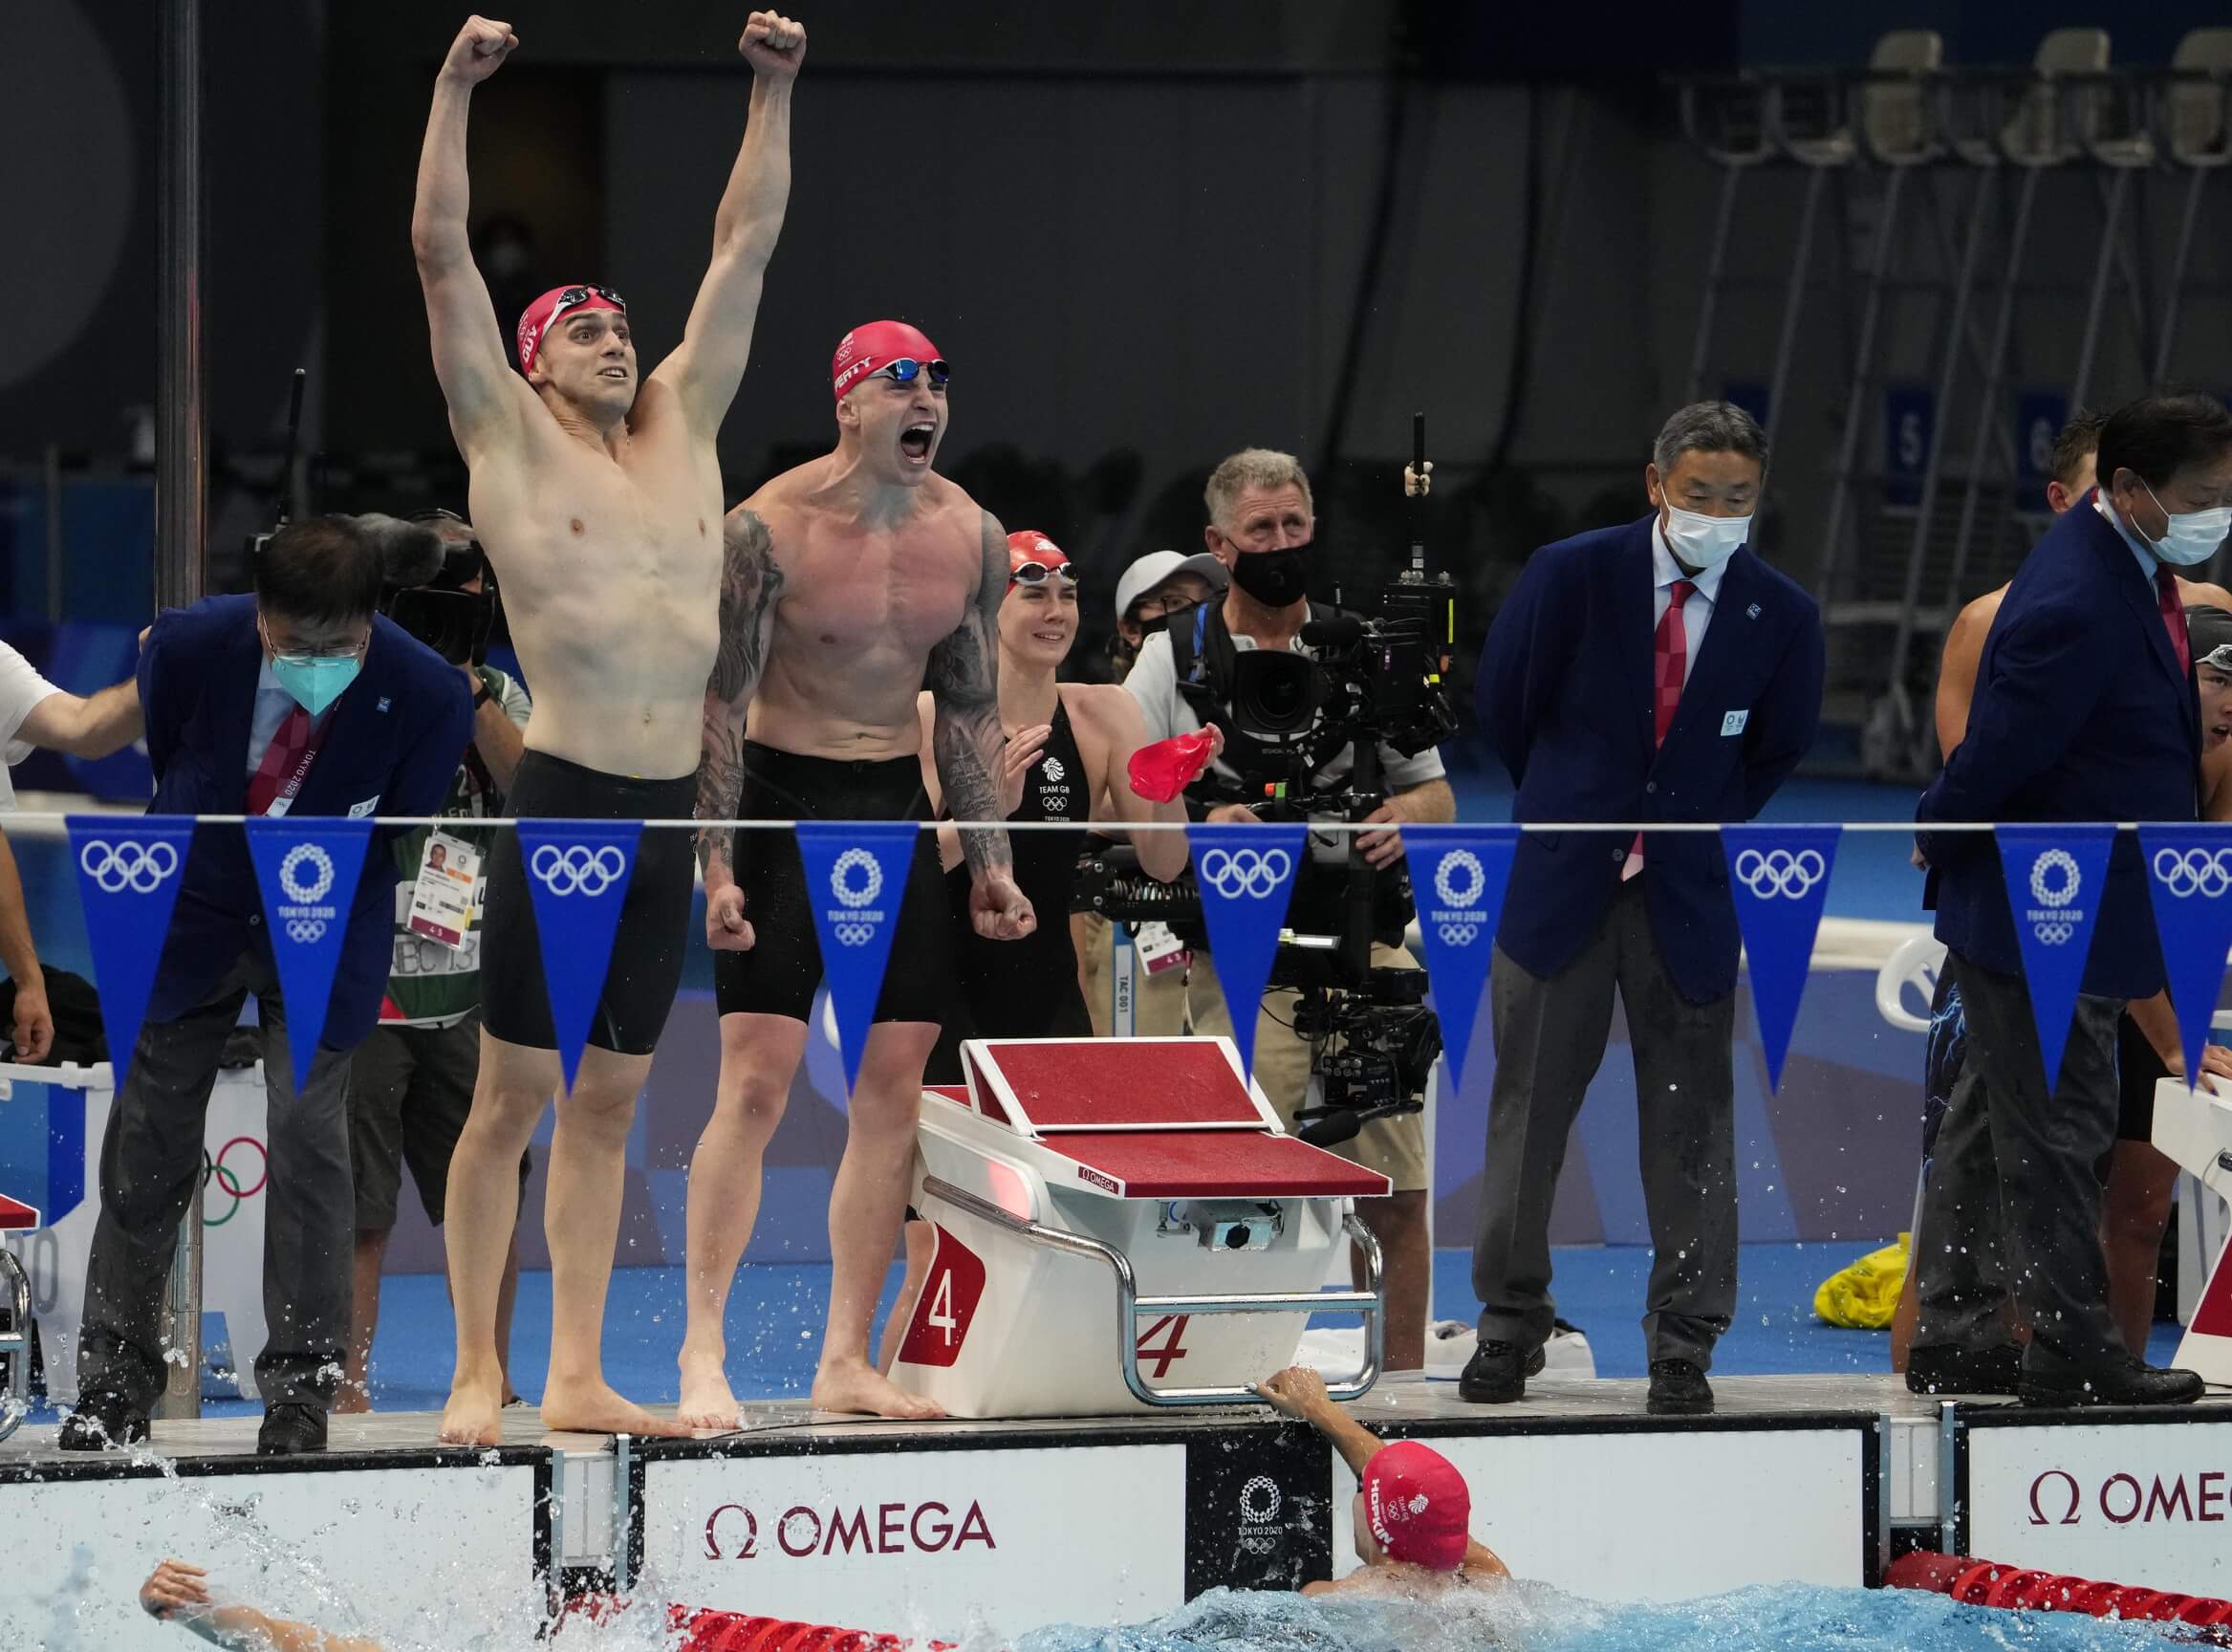 Jul 31, 2021; Tokyo, Japan; James Guy (GBR) and Adam Peaty (GBR) celebrate victory in the mixed 4x100m medley relay final during the Tokyo 2020 Olympic Summer Games at Tokyo Aquatics Centre. Mandatory Credit: Rob Schumacher-USA TODAY Sports